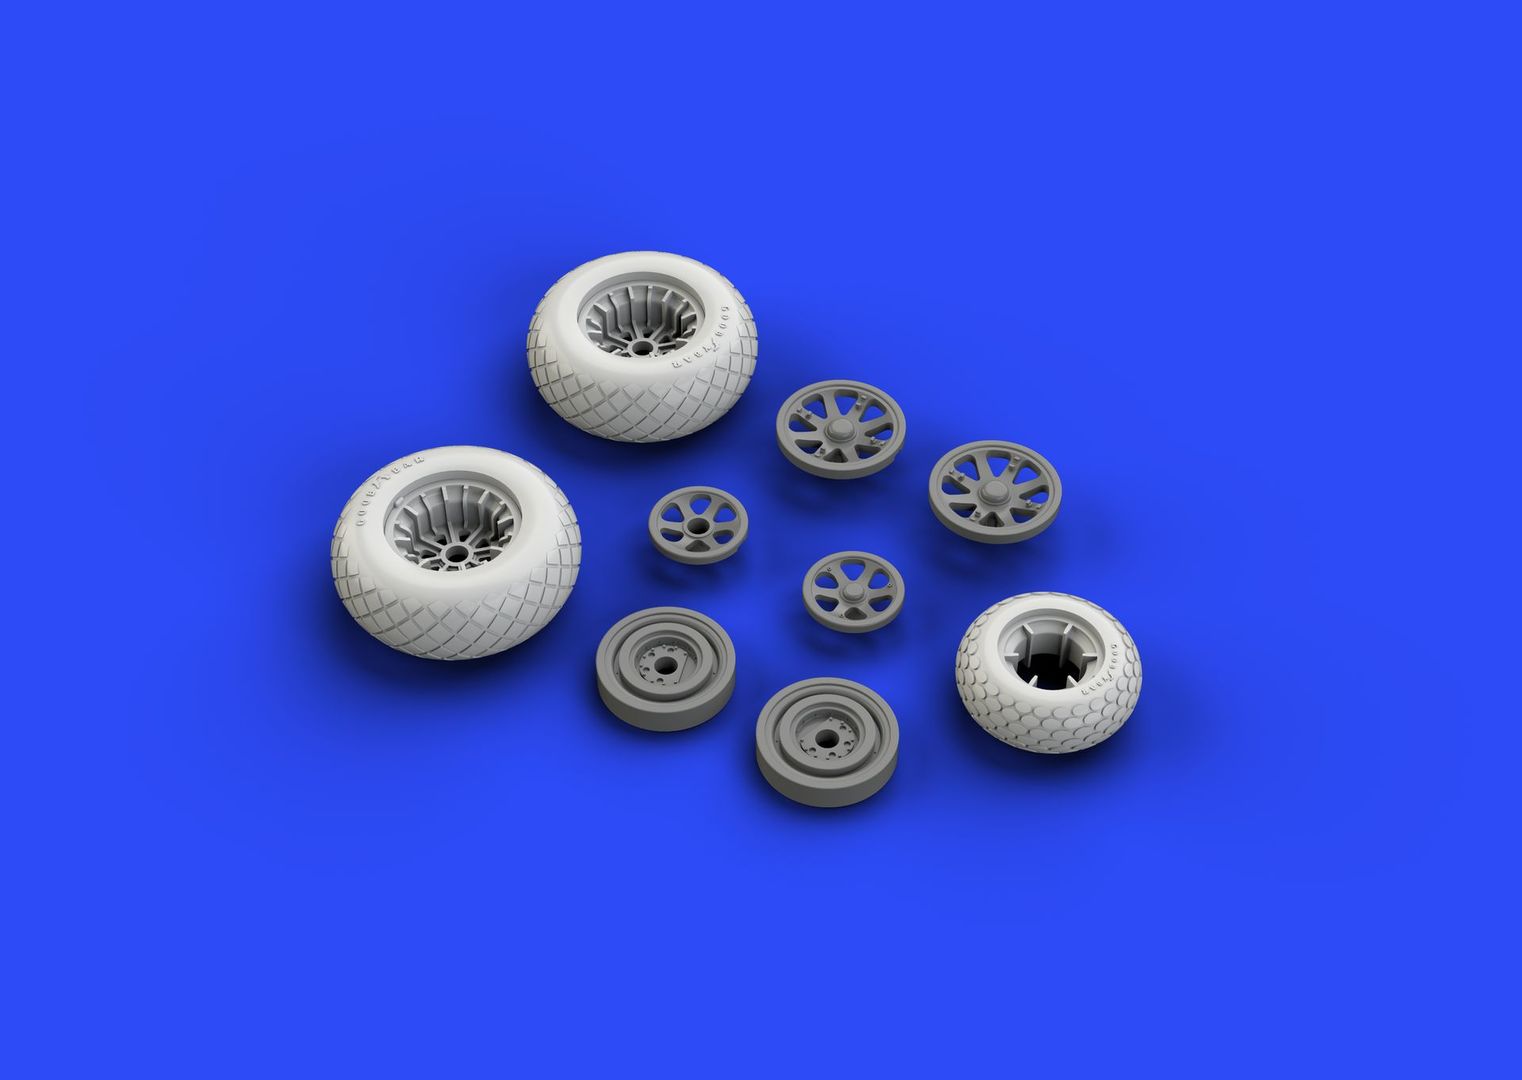 EDUARD 1/48 AIRCRAFT 648258 P38 WHEELS FOR ACY PHOTO-ETCH & RESIN